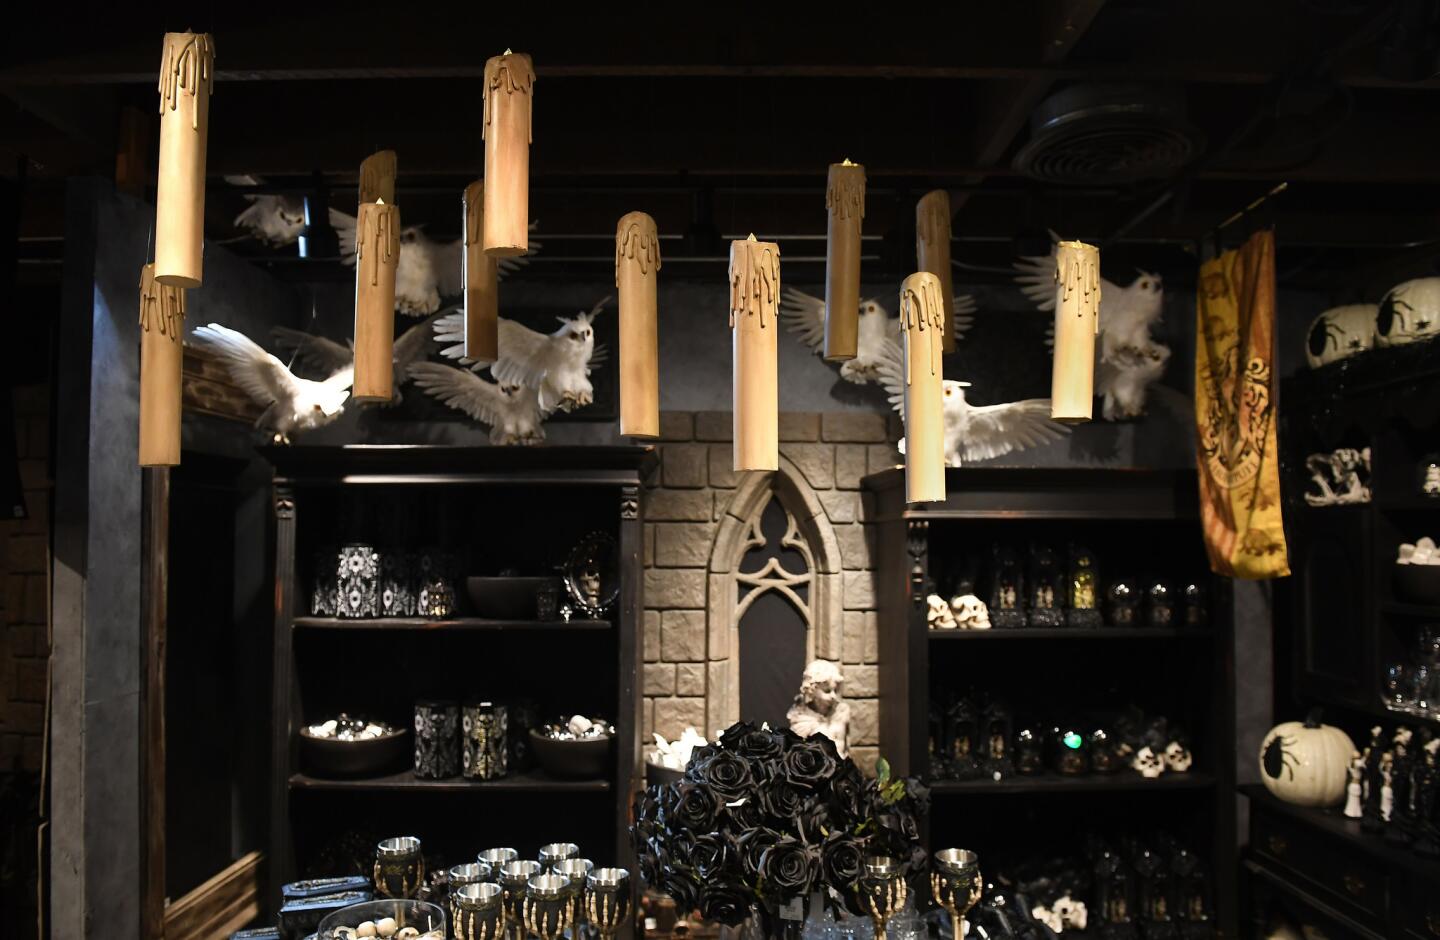 Roger’s Gardens in Corona del Mar casts a spell with its Halloween boutique